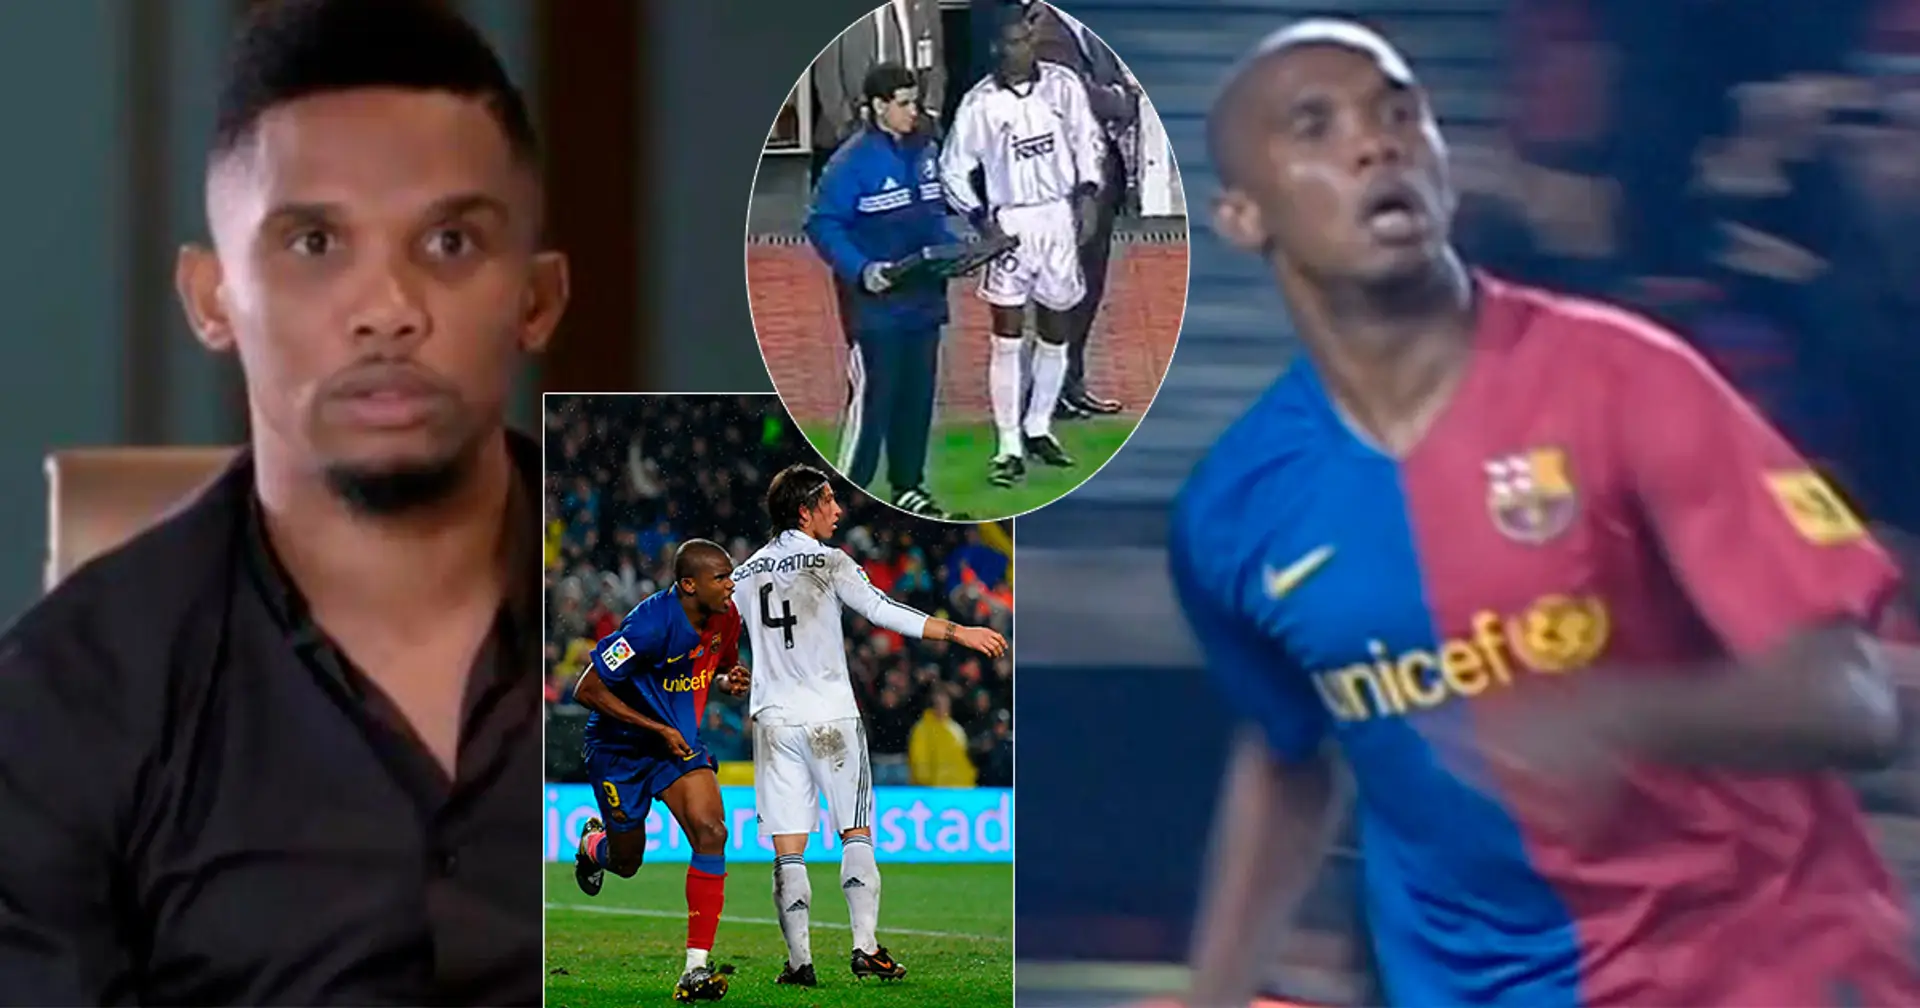 'If it hadn't been for Real Madrid I would never have got this far': How Eto’o was forced to apologize publicly for a chant